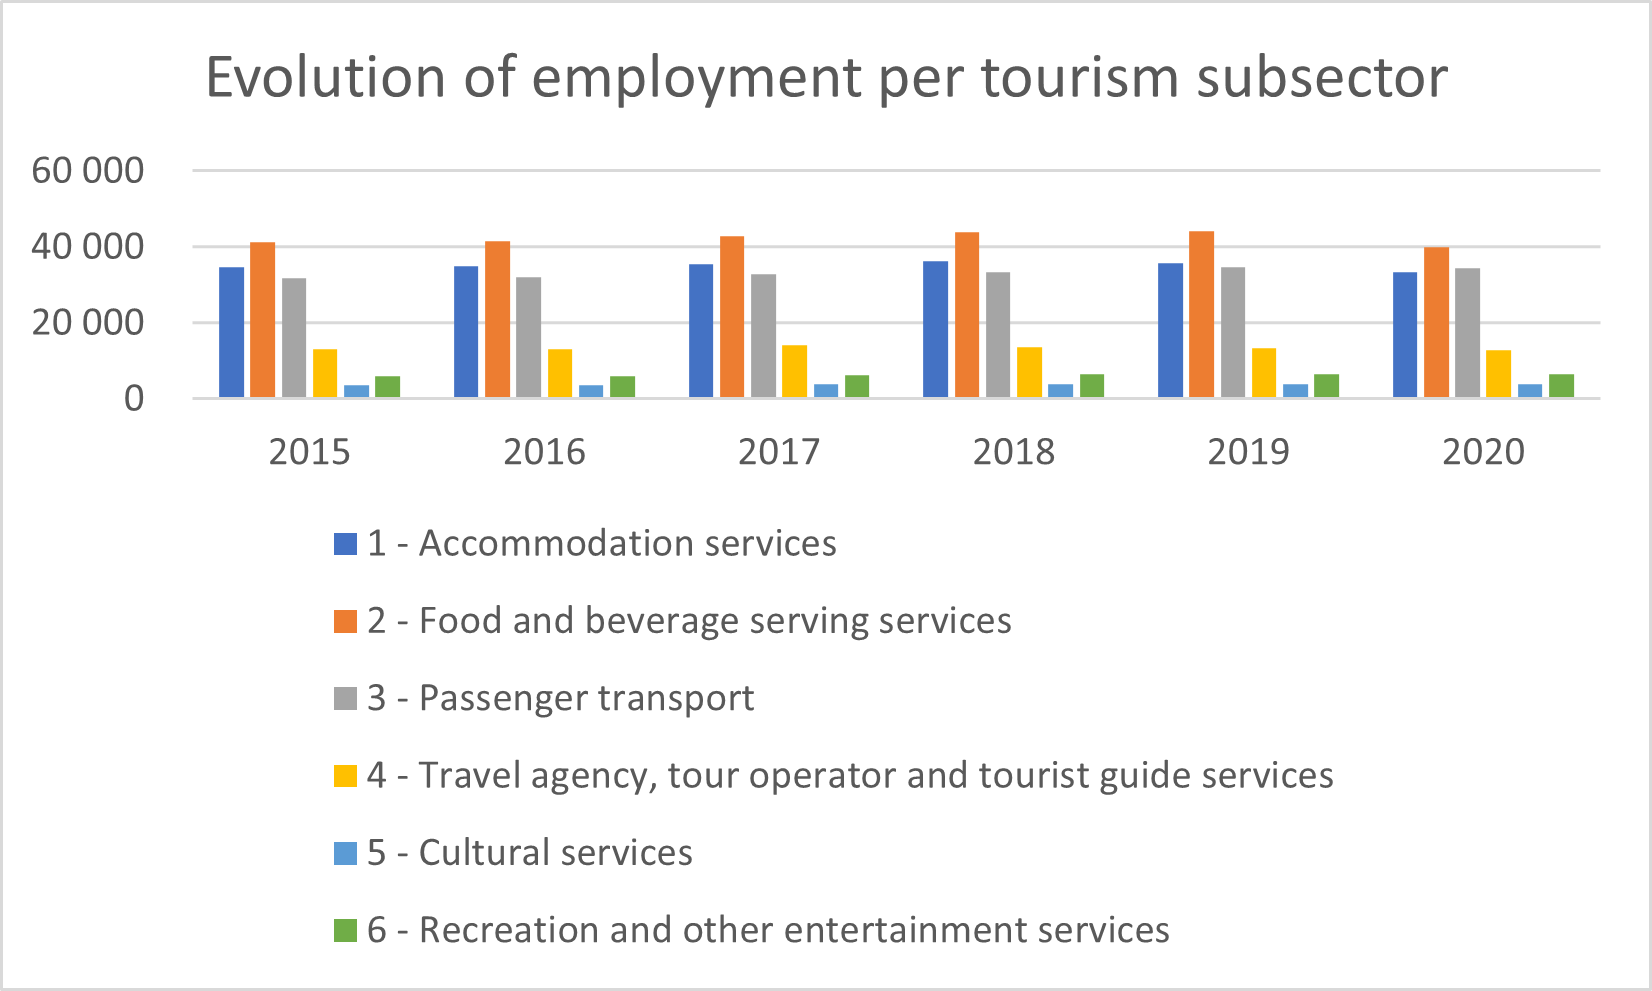 Table 5 - Evolution of employment per tourism subsector